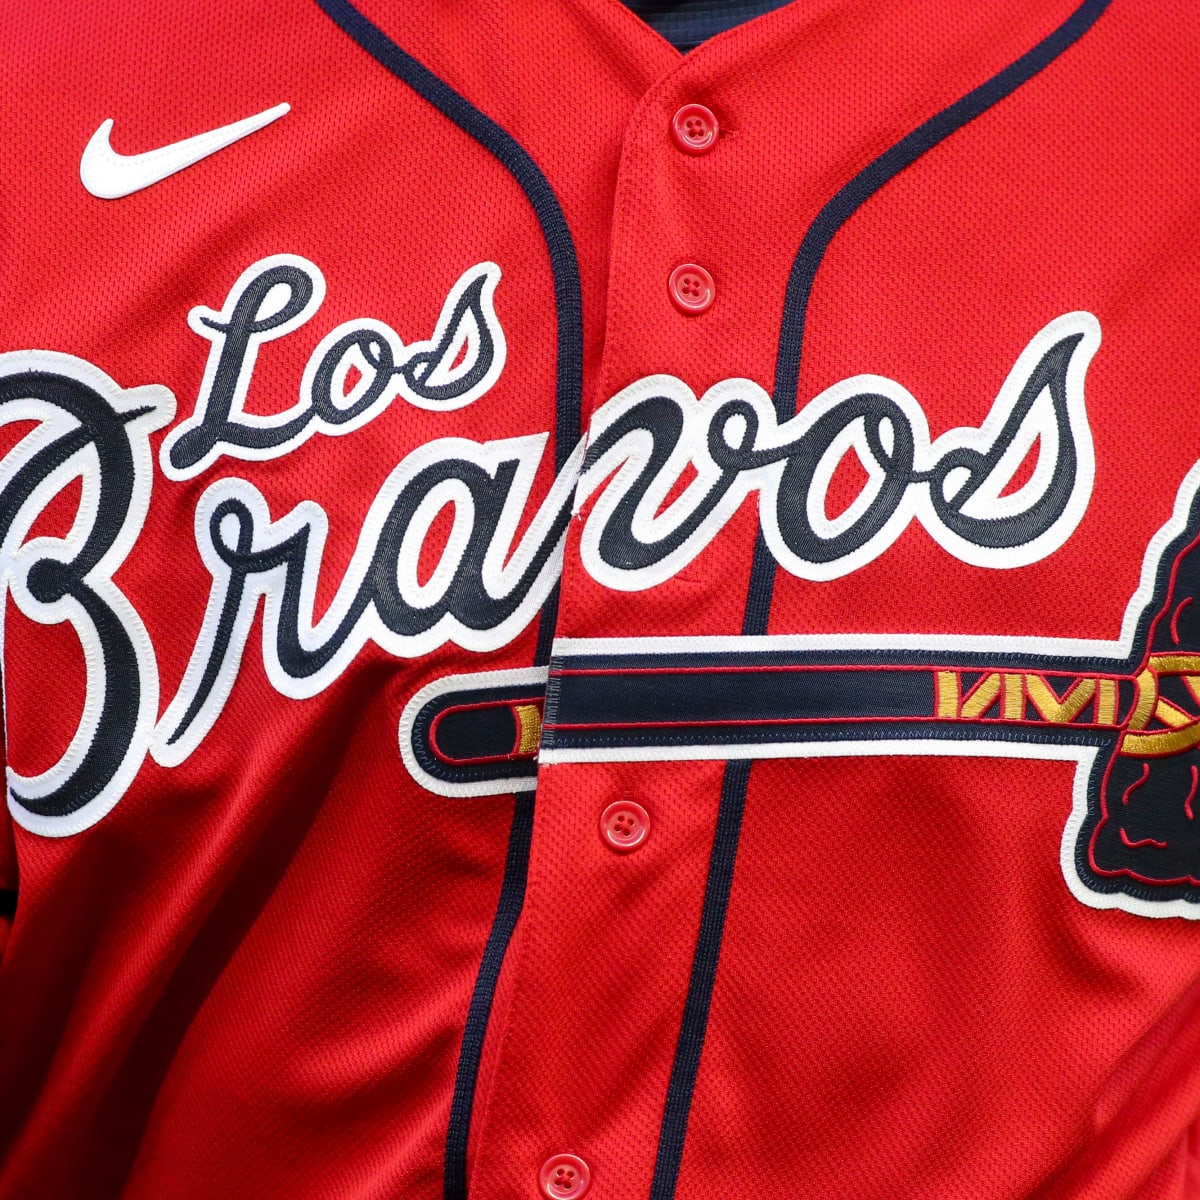 Celebrate a new season with a brand new Braves jersey